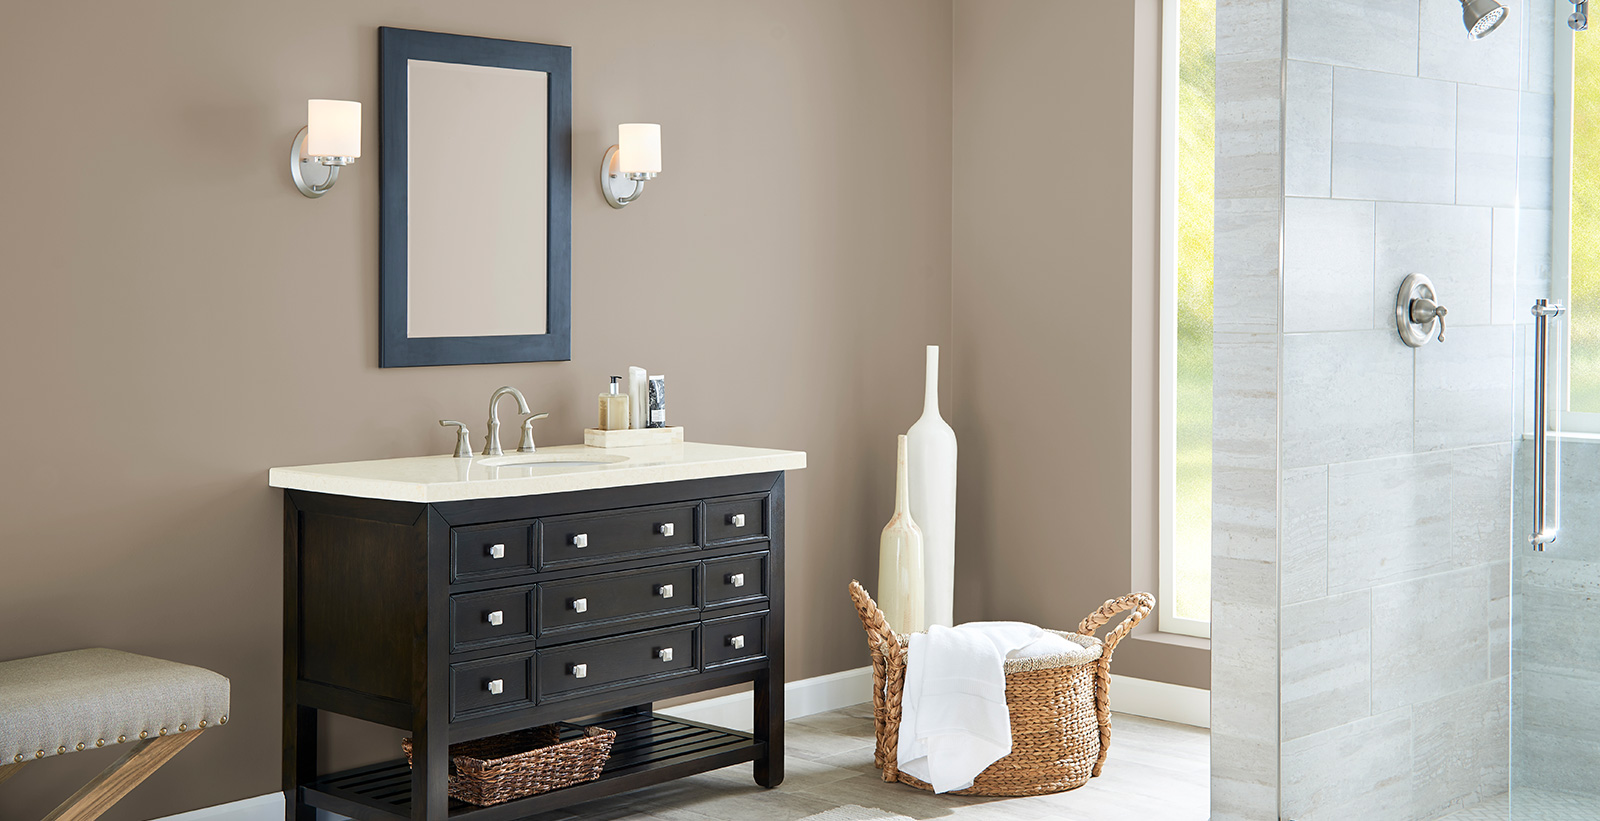 Versatile and comfortable styled bathroom with brown walls and white trim.